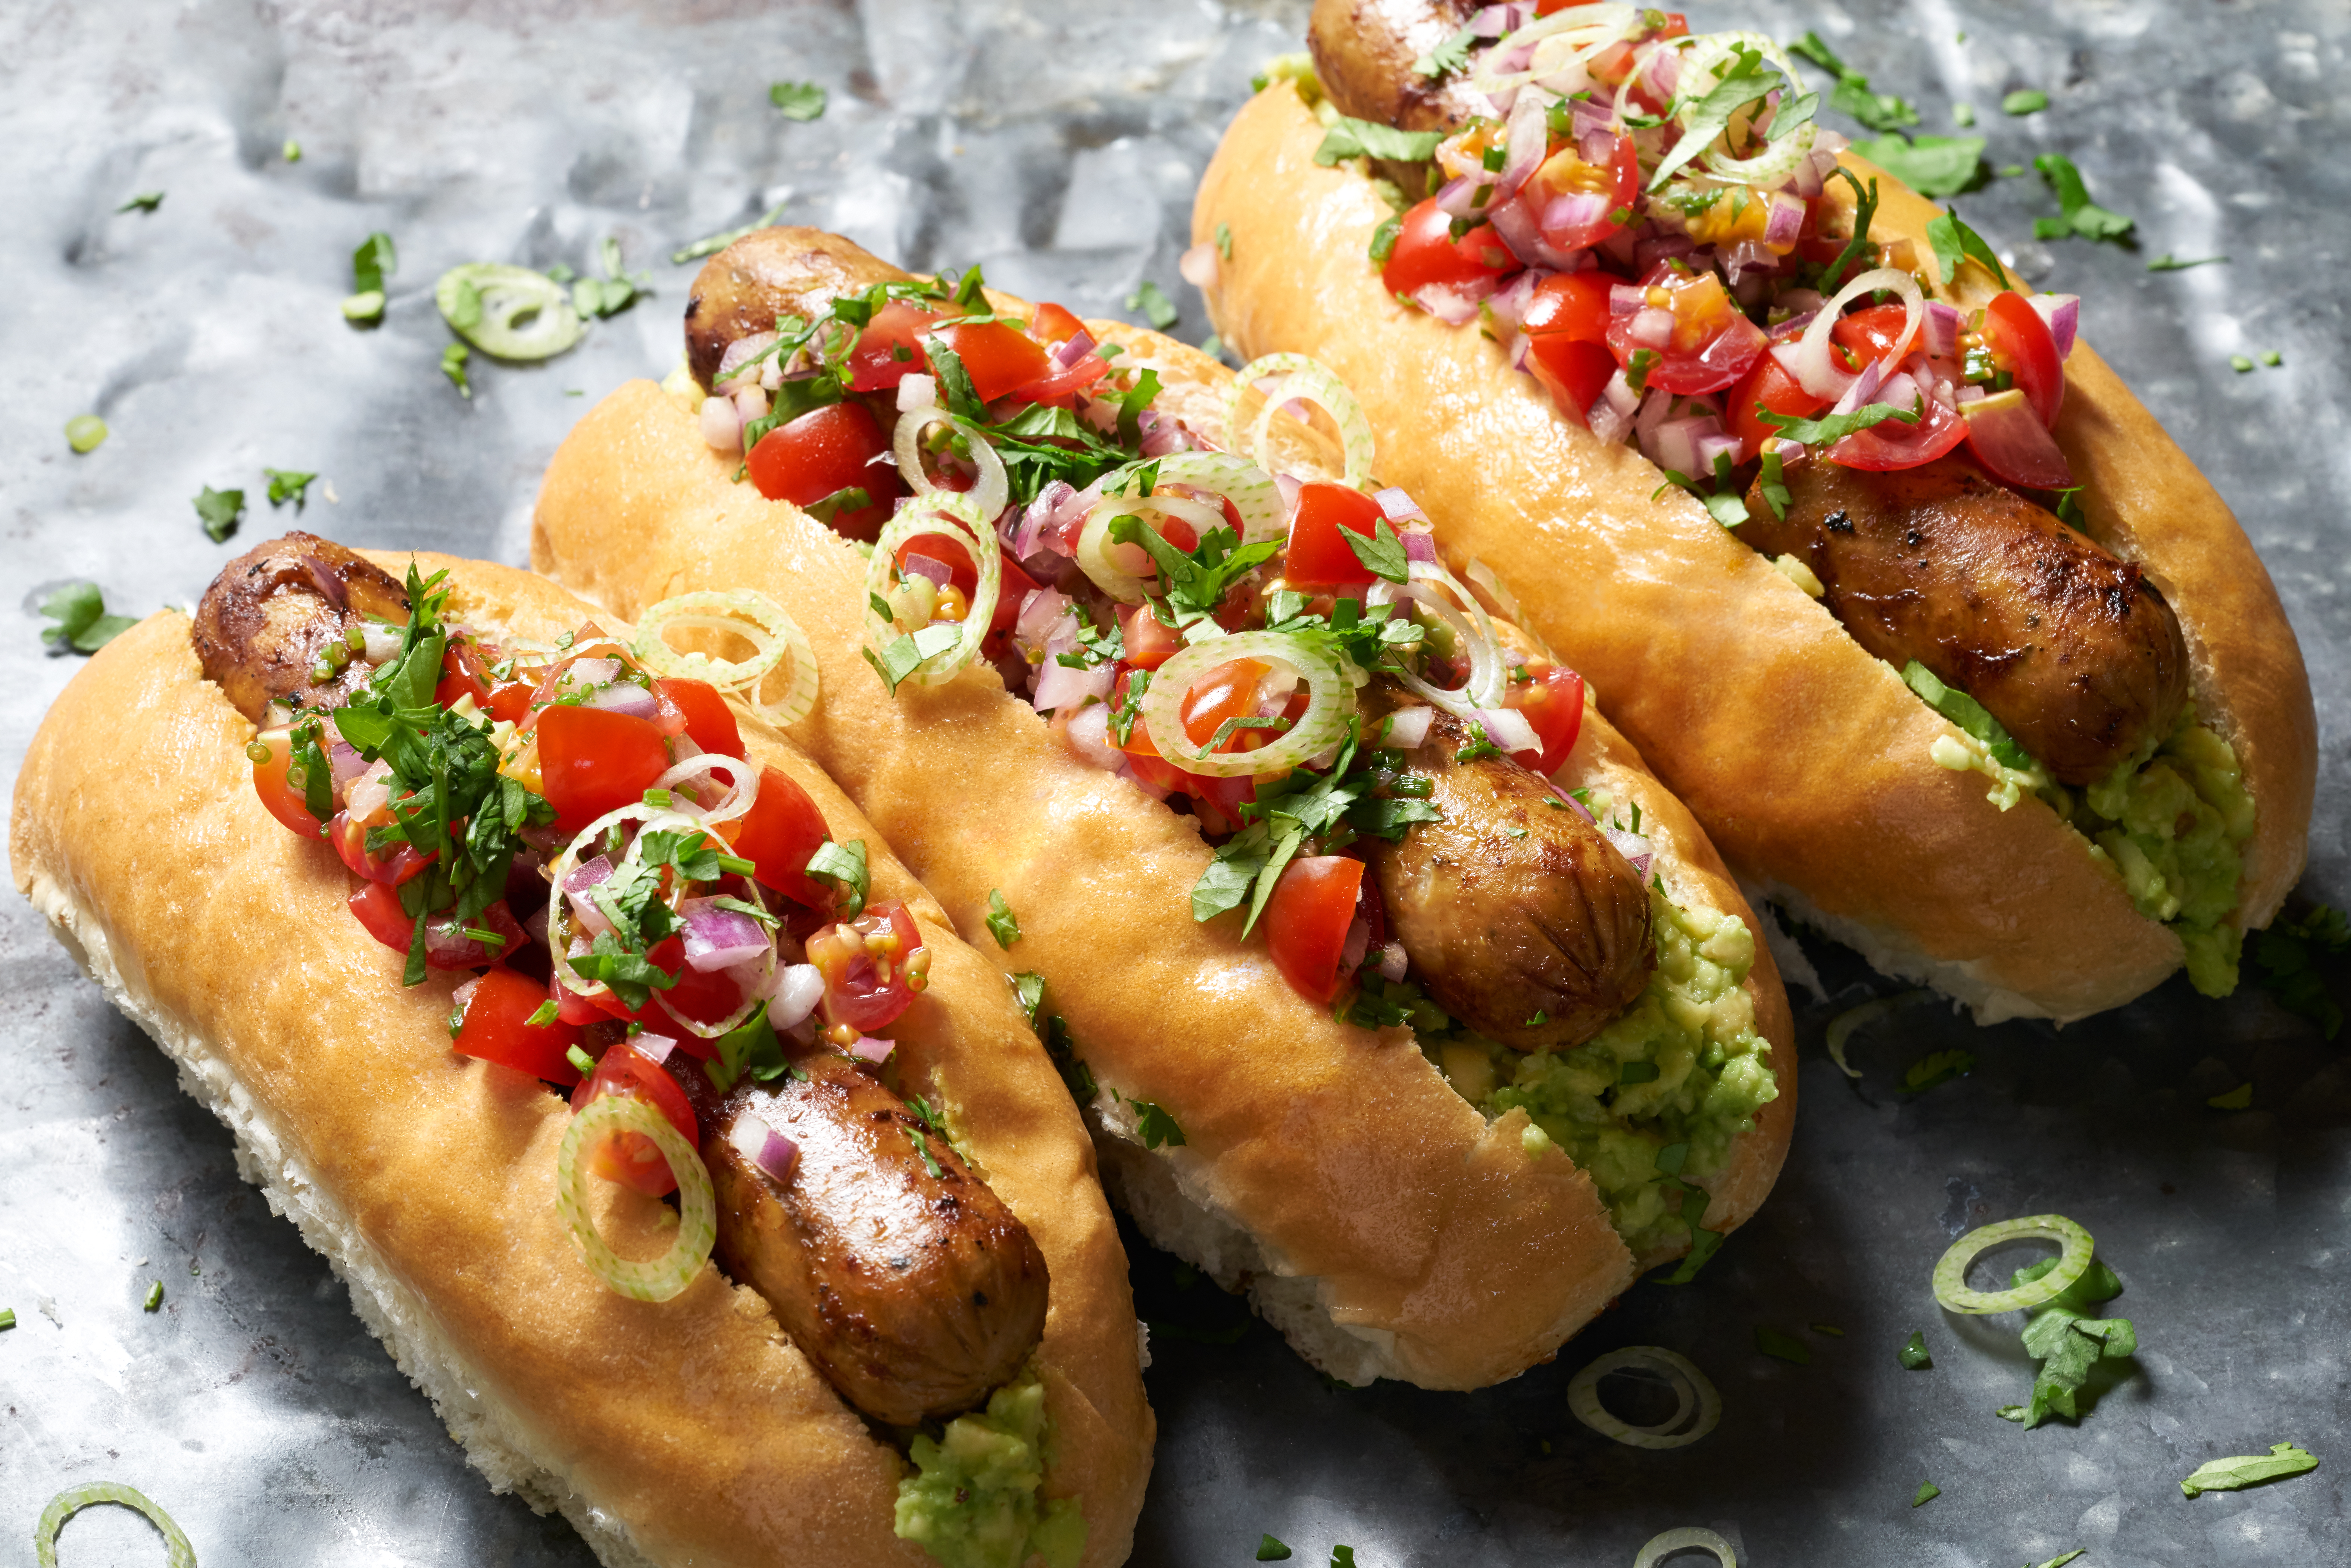 Mexican-style hot dogs recipe